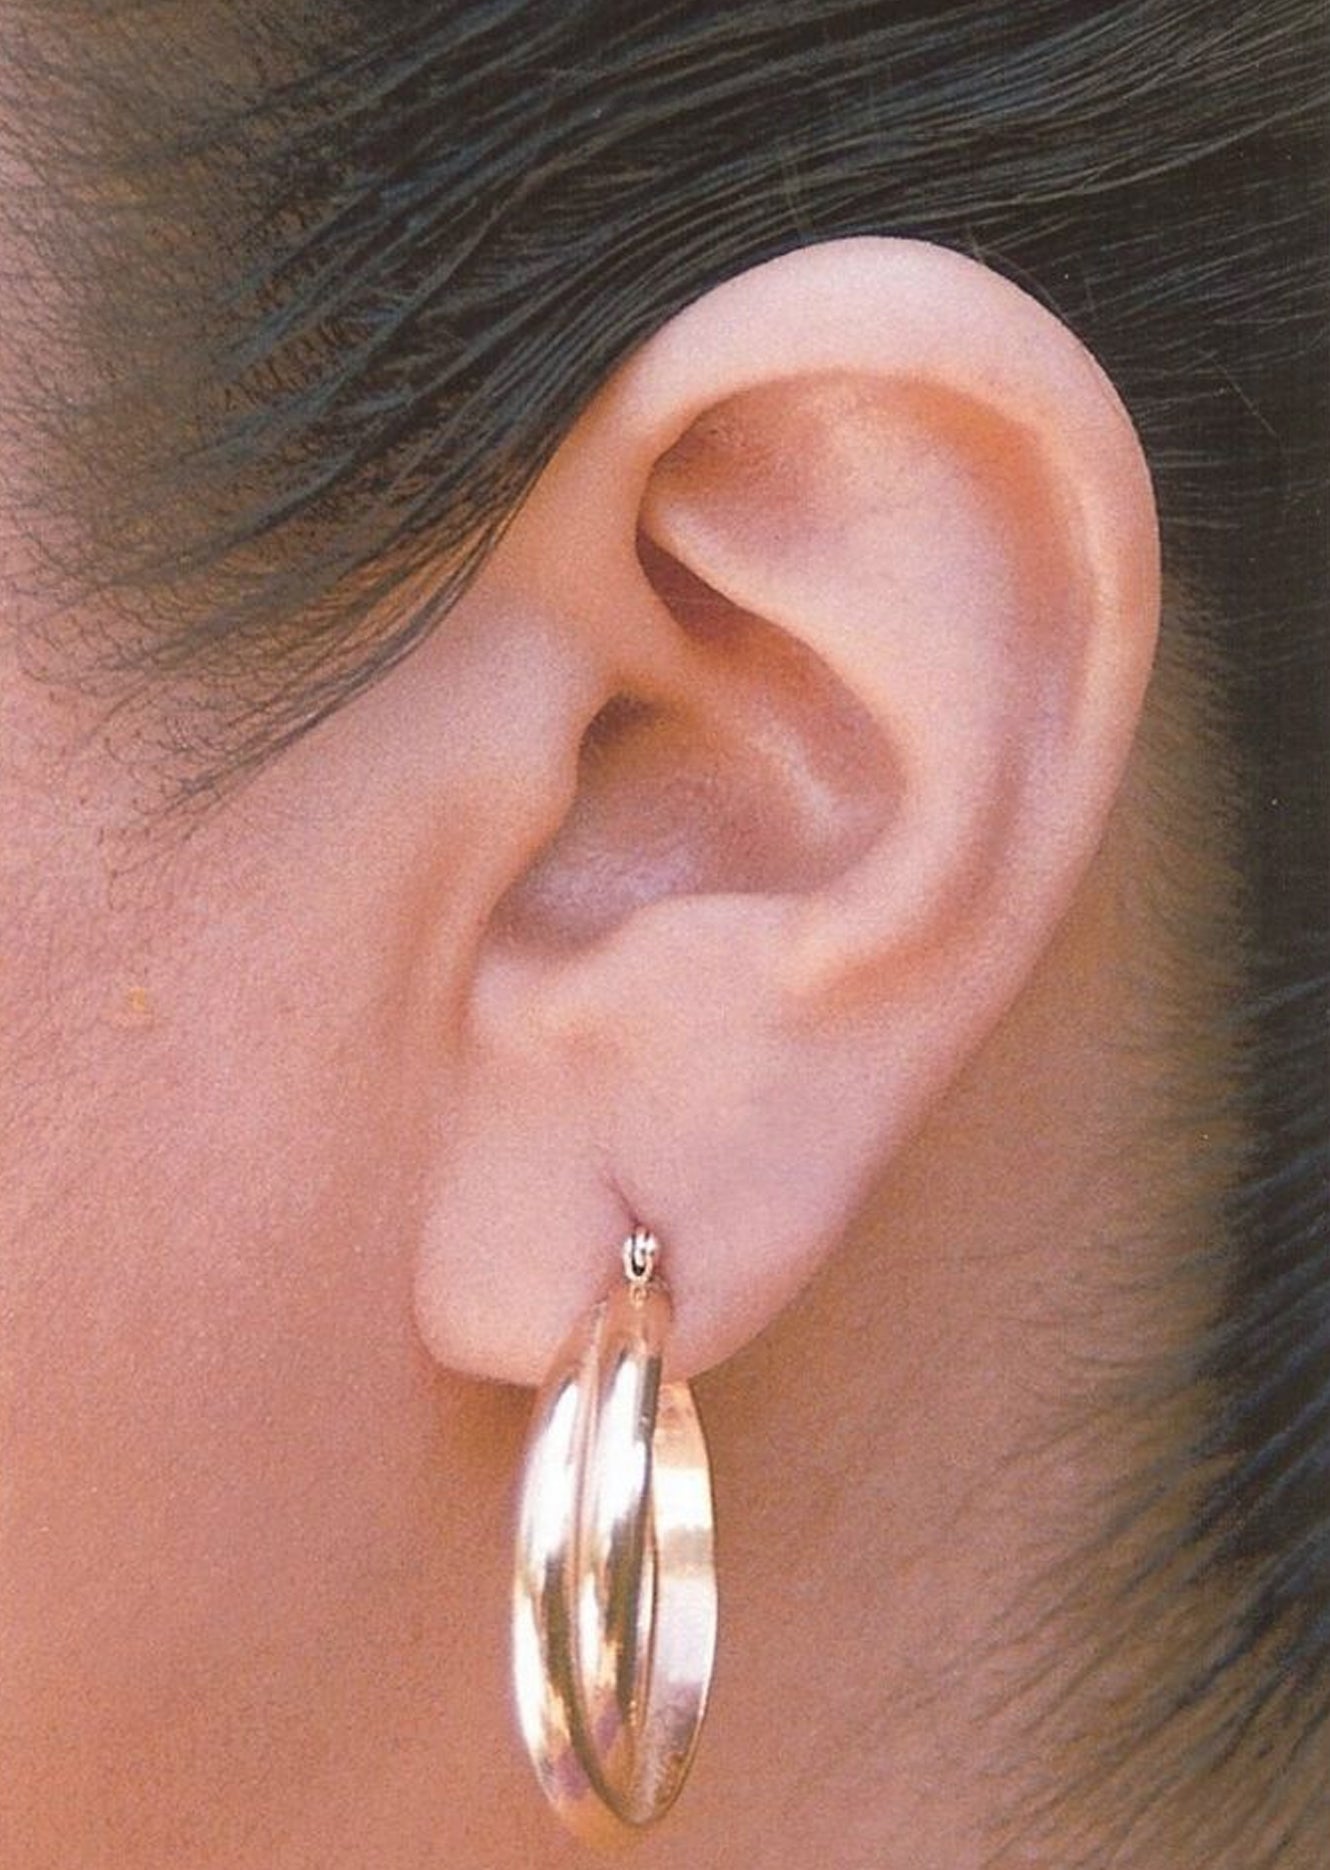 Lobe Wonder | Earring Support Patches